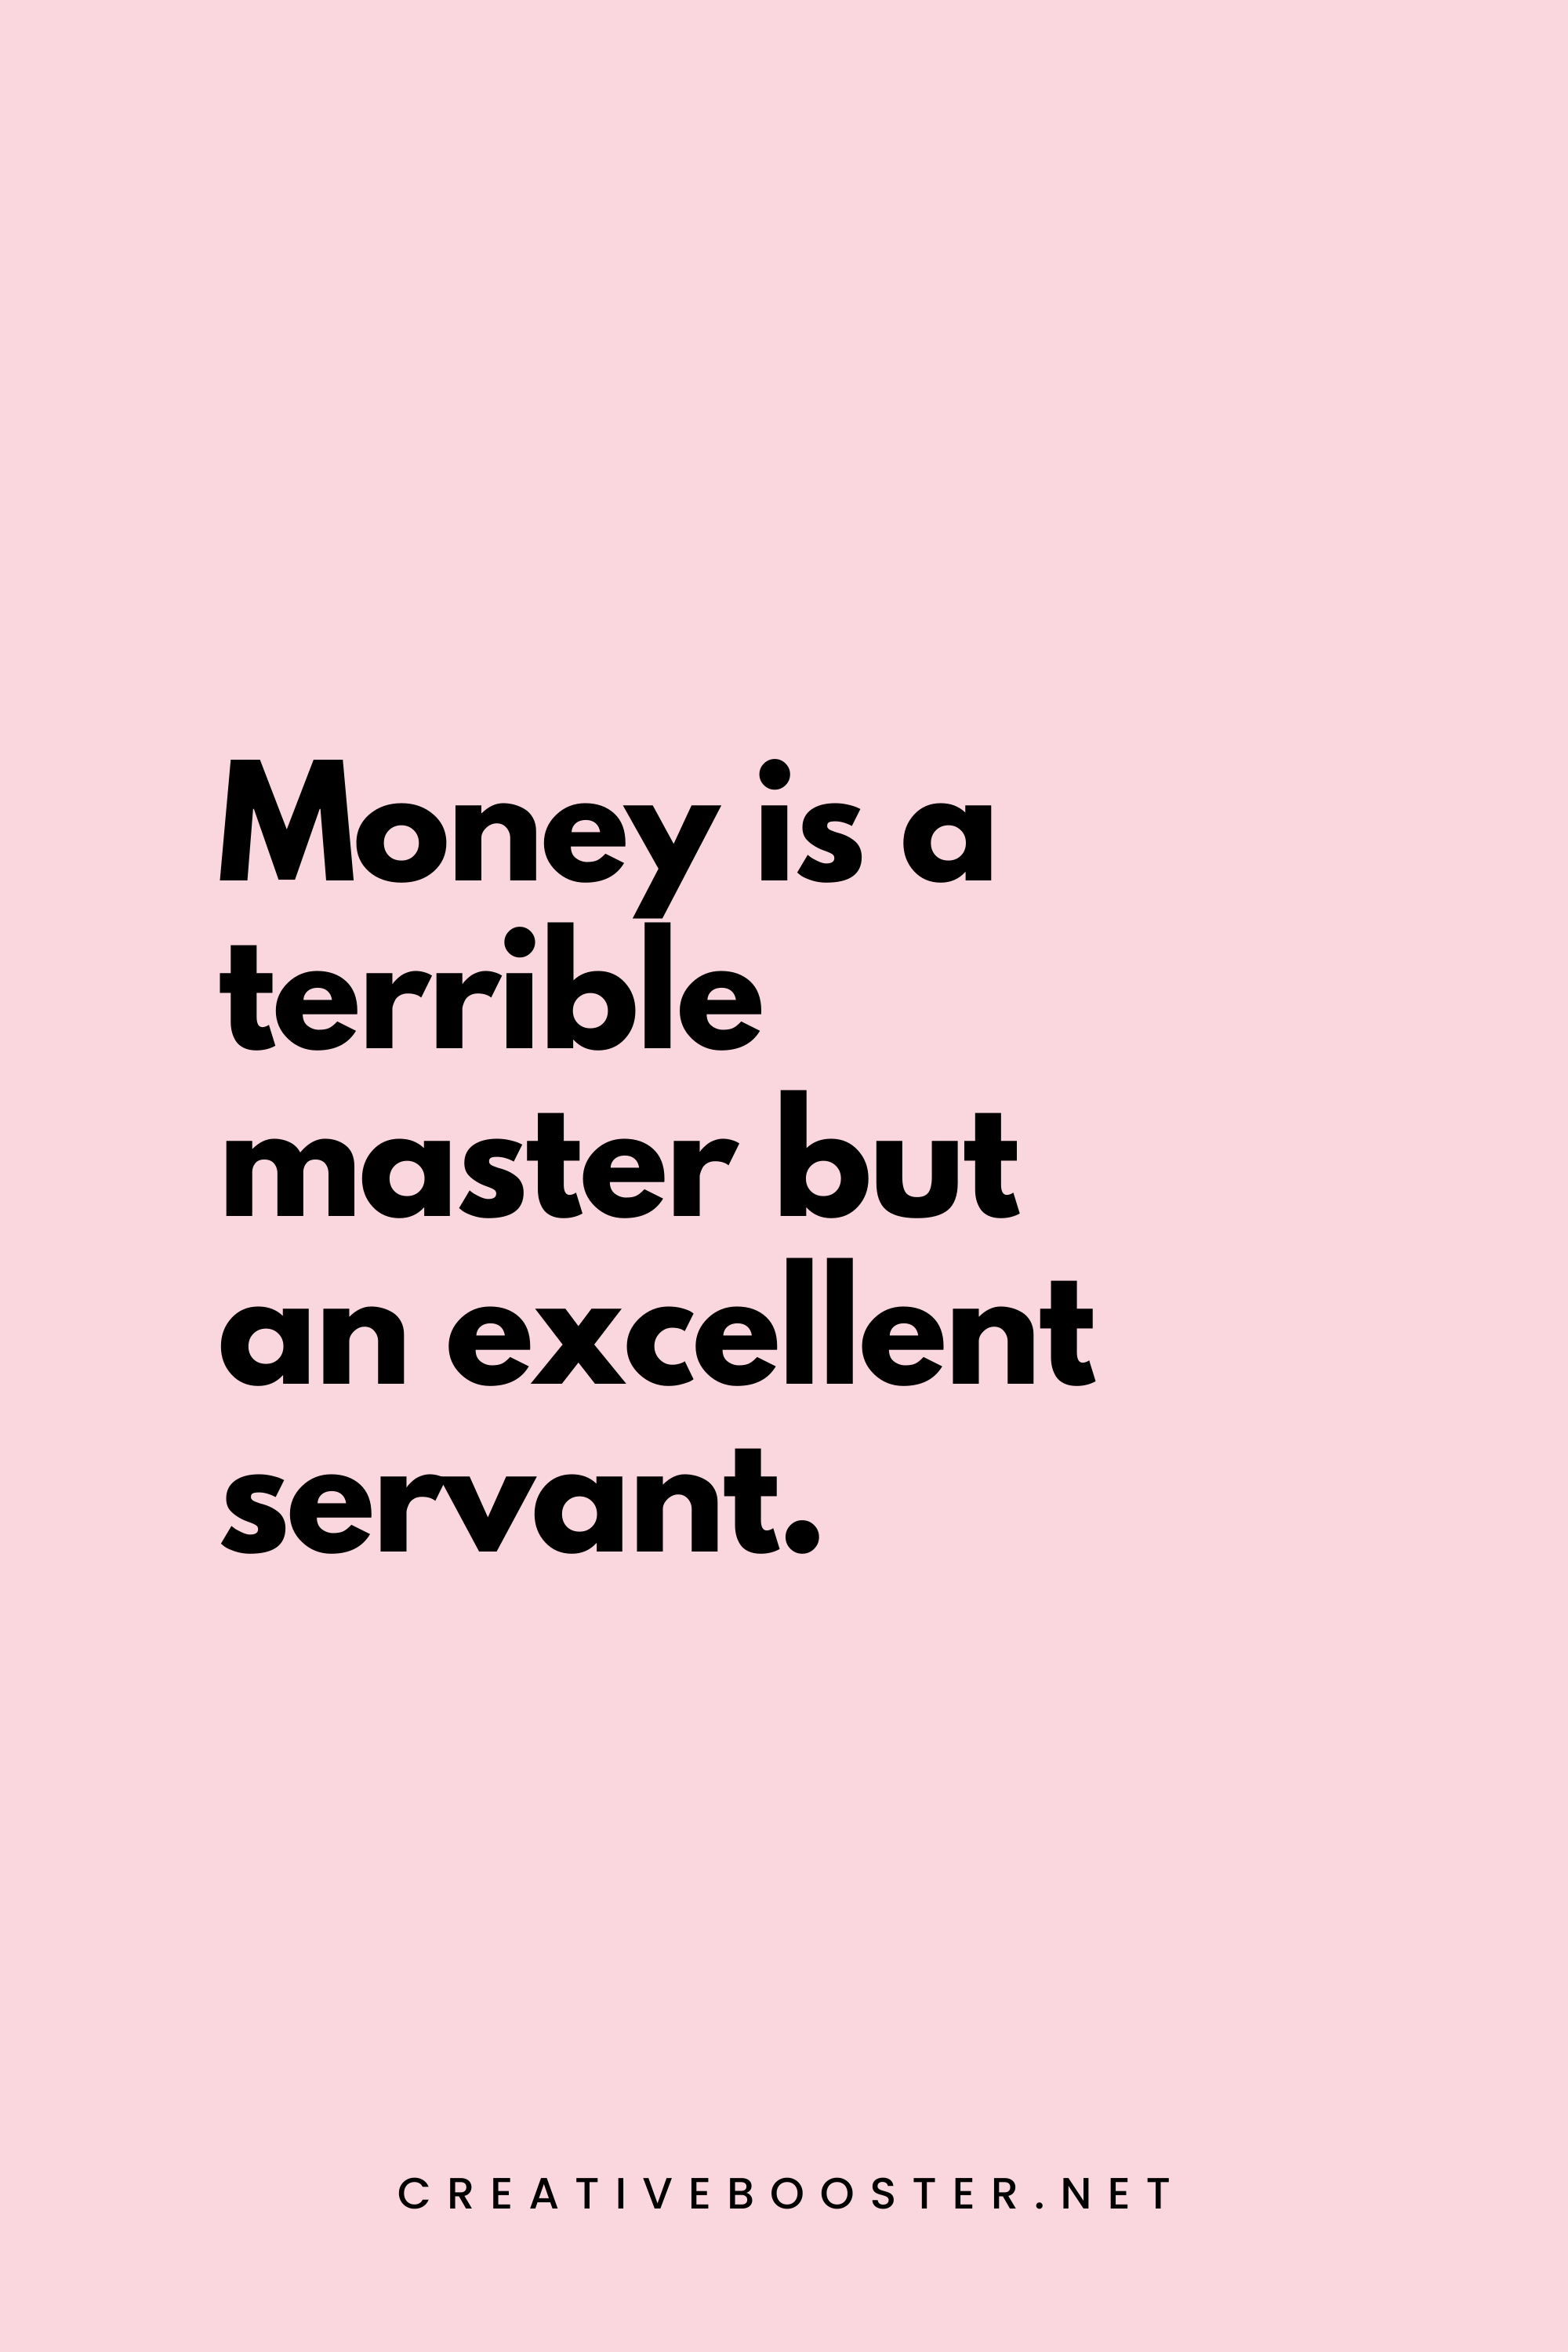 10. Money is a terrible master but an excellent servant. - P.T. Barnum - 1. Popular Financial Freedom Quotes